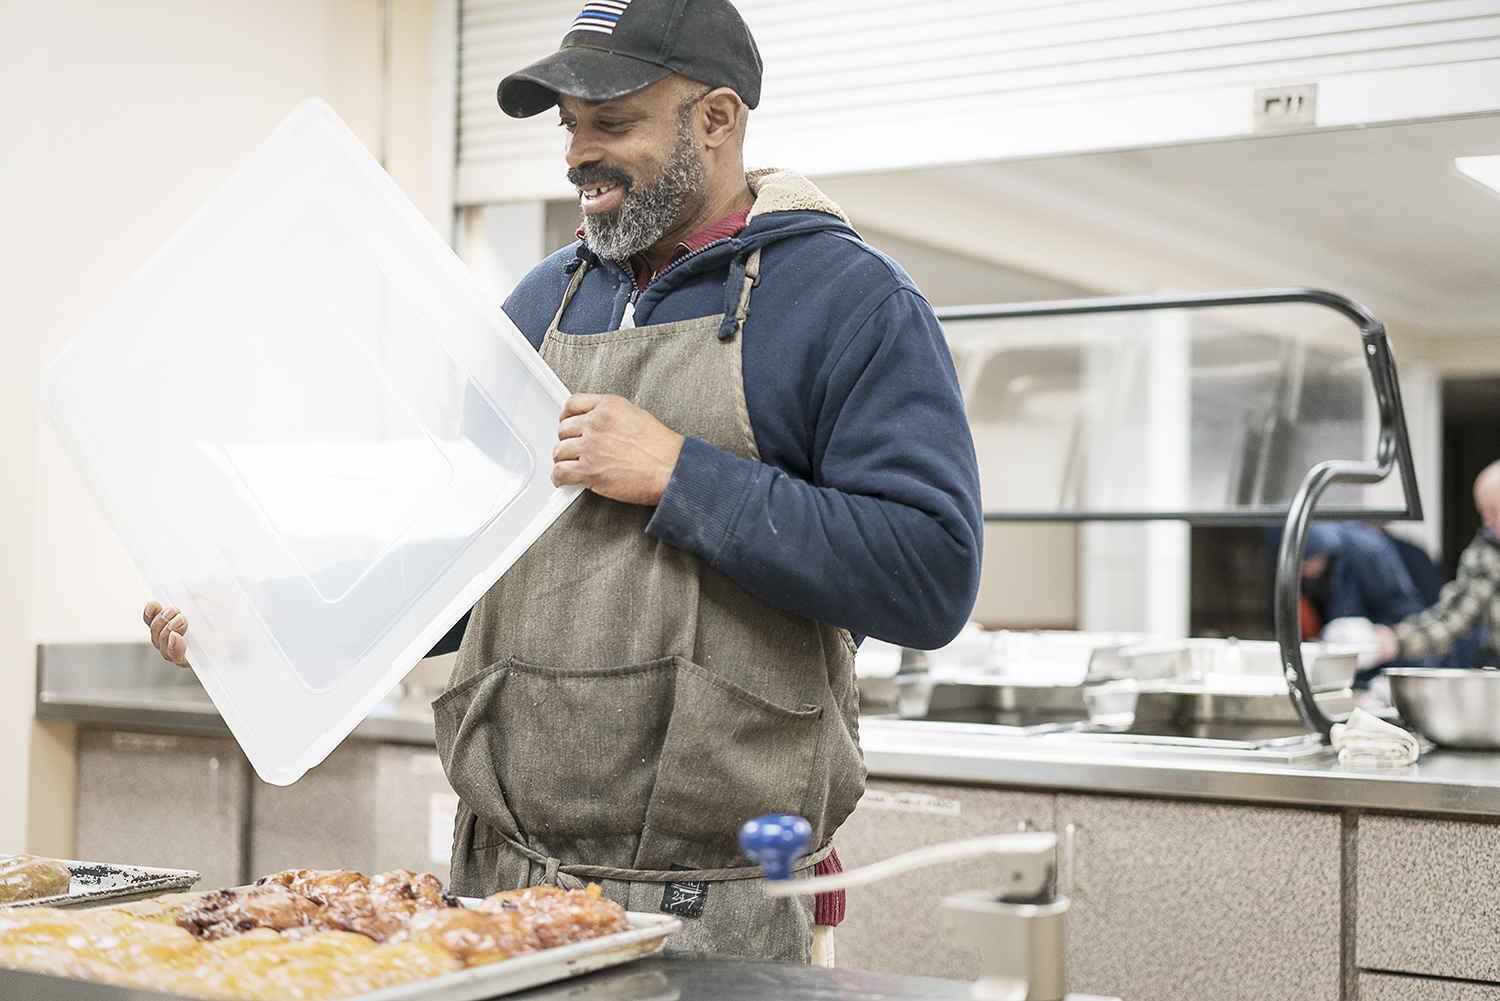 Randall Thompson, 50, of Flint, smiles as he covers up fresh donuts for delivery at Blueline Donuts inside Carriage Town Ministries.